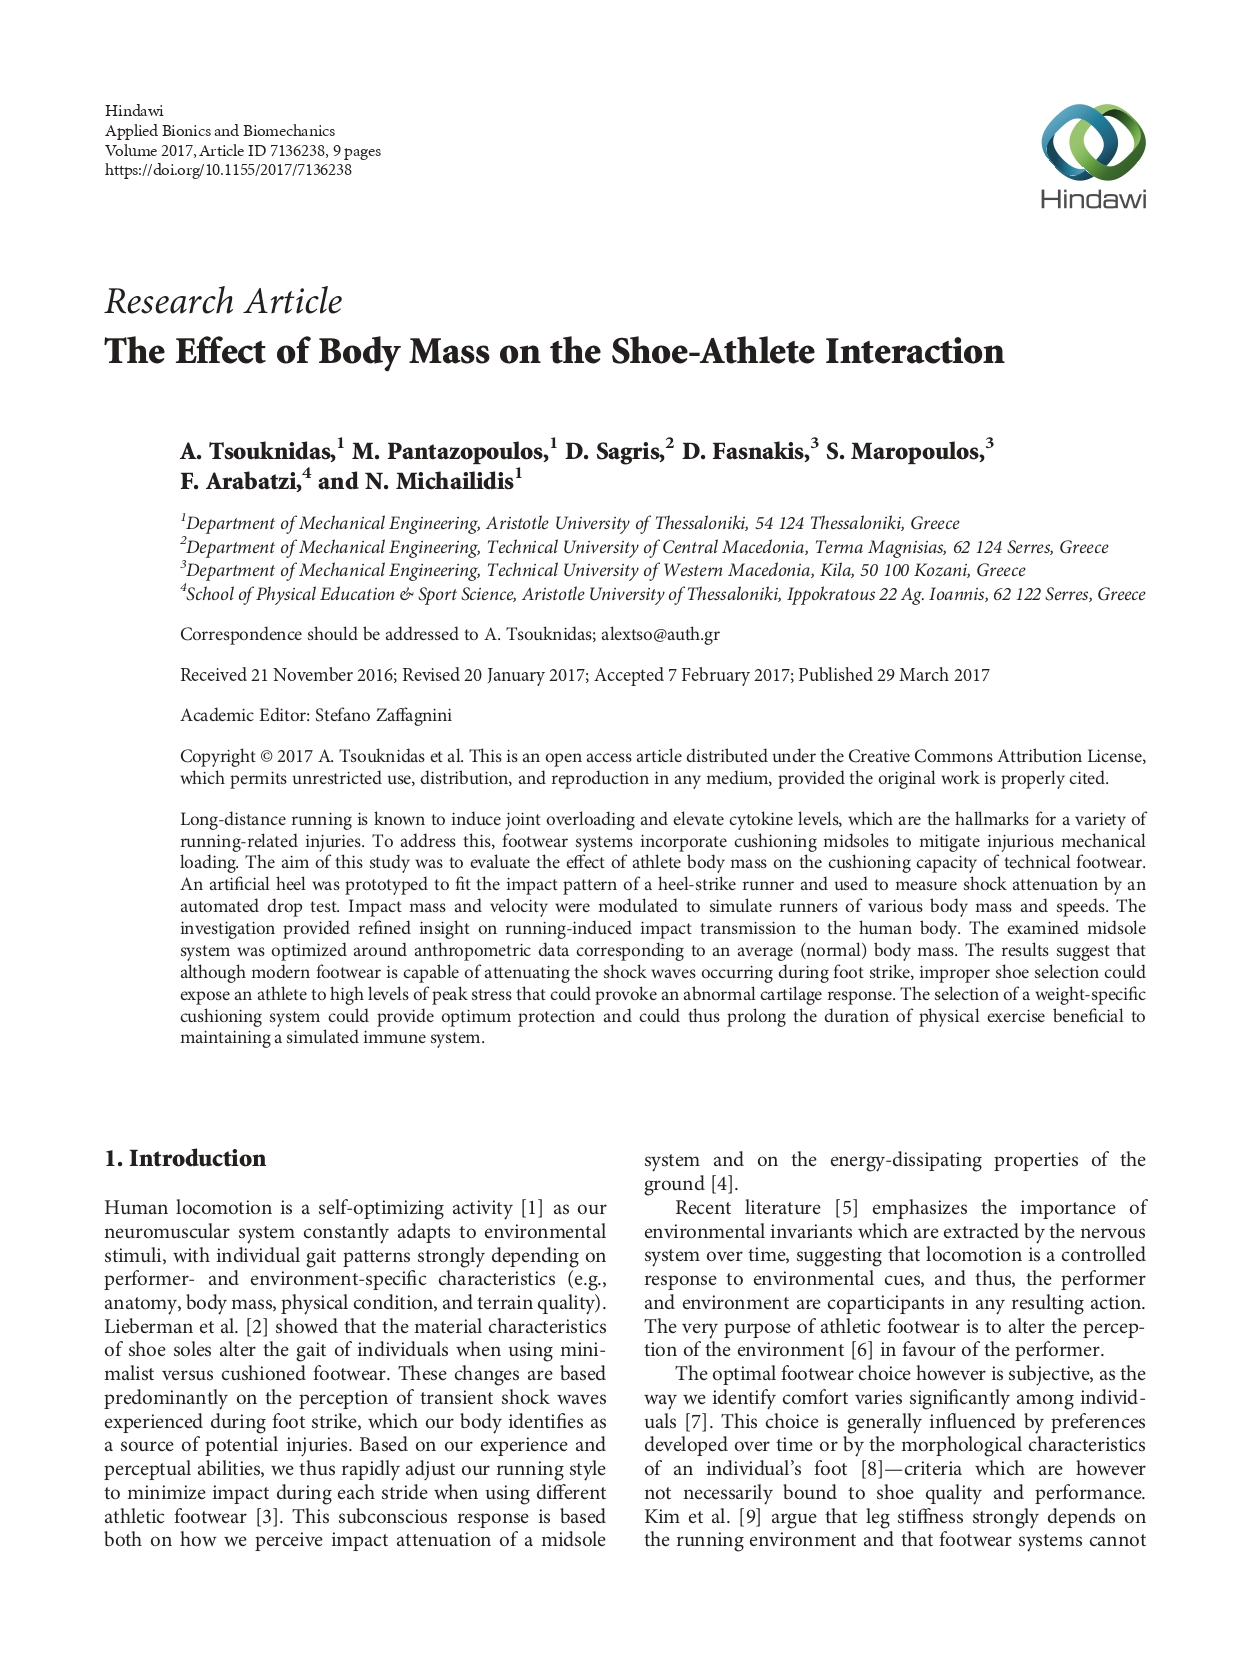 The Effect of Body Mass on the Shoe-Athlete Interaction_page-0001.jpg